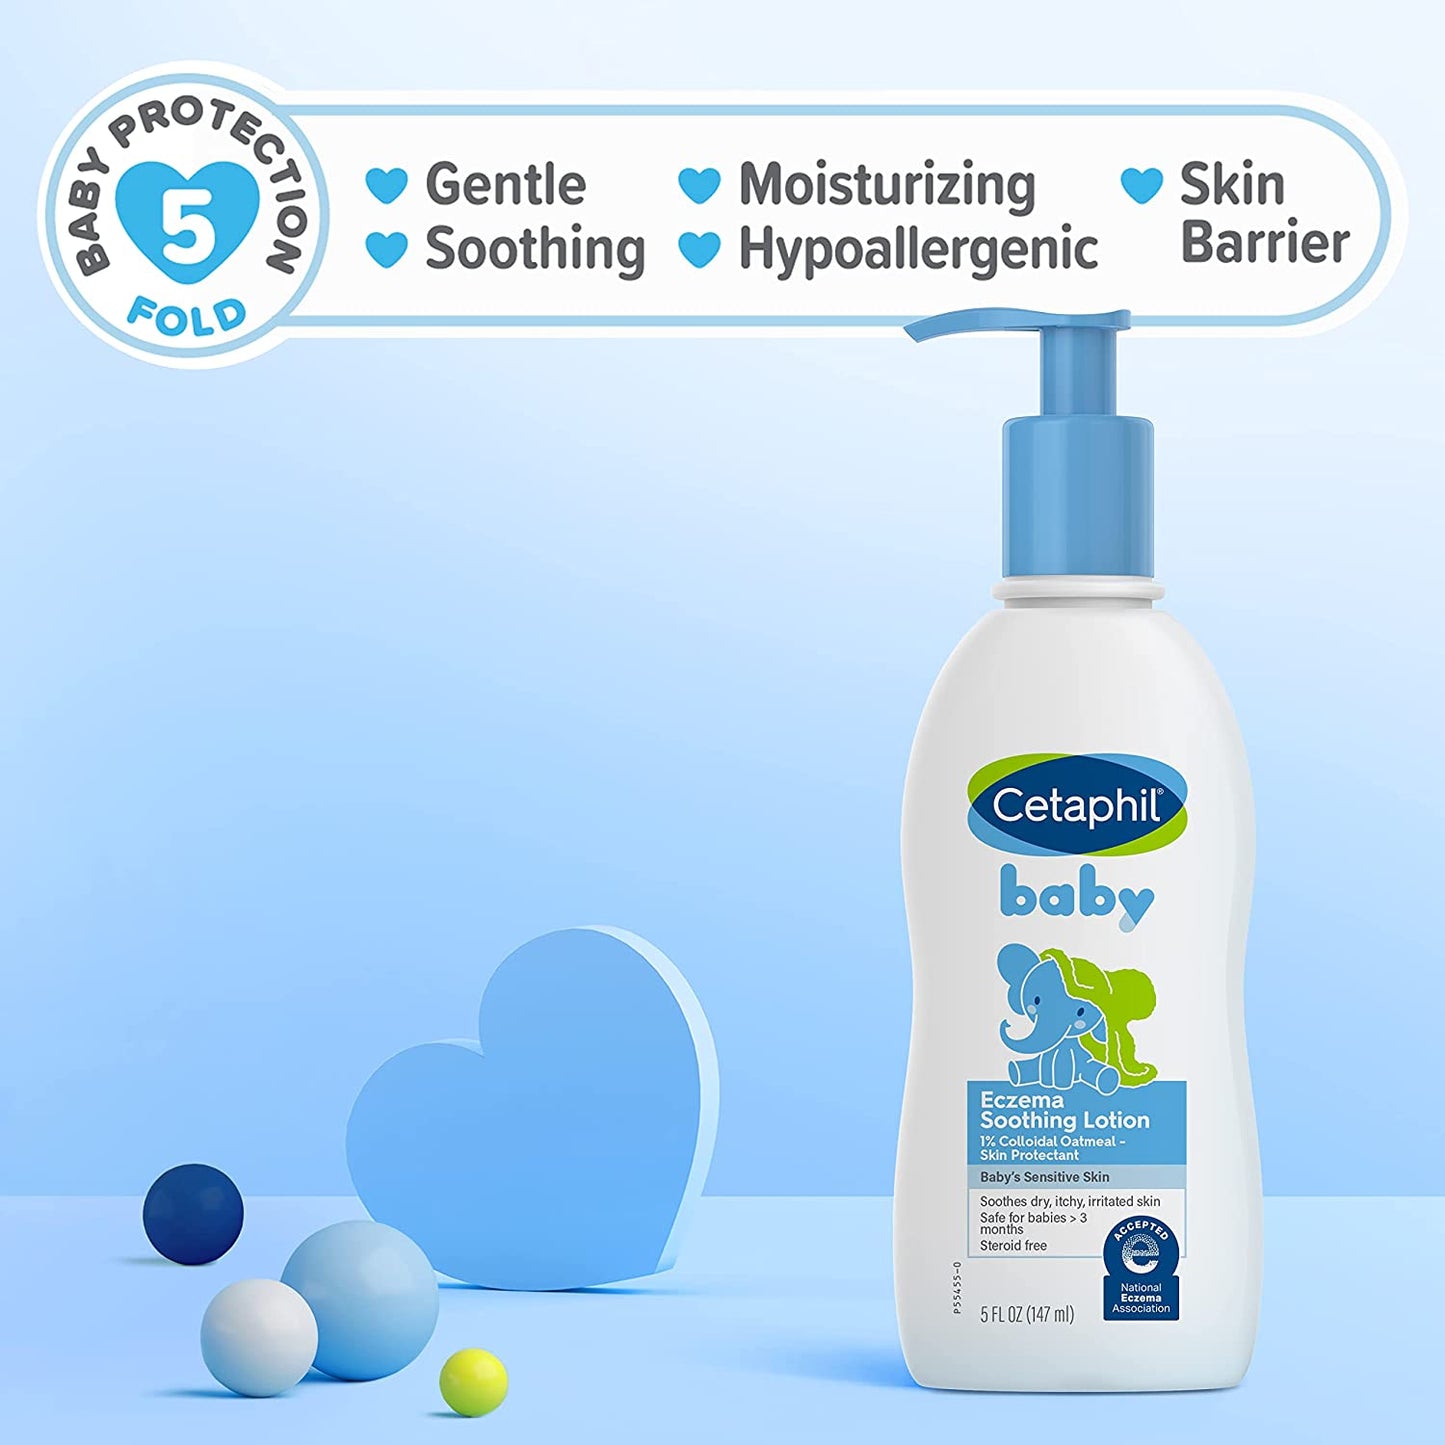 Cetaphil Baby Eczema Soothing Lotion With Colloidal Oatmeal For Dry Itchy And Irritated Skin 5 Fl Oz